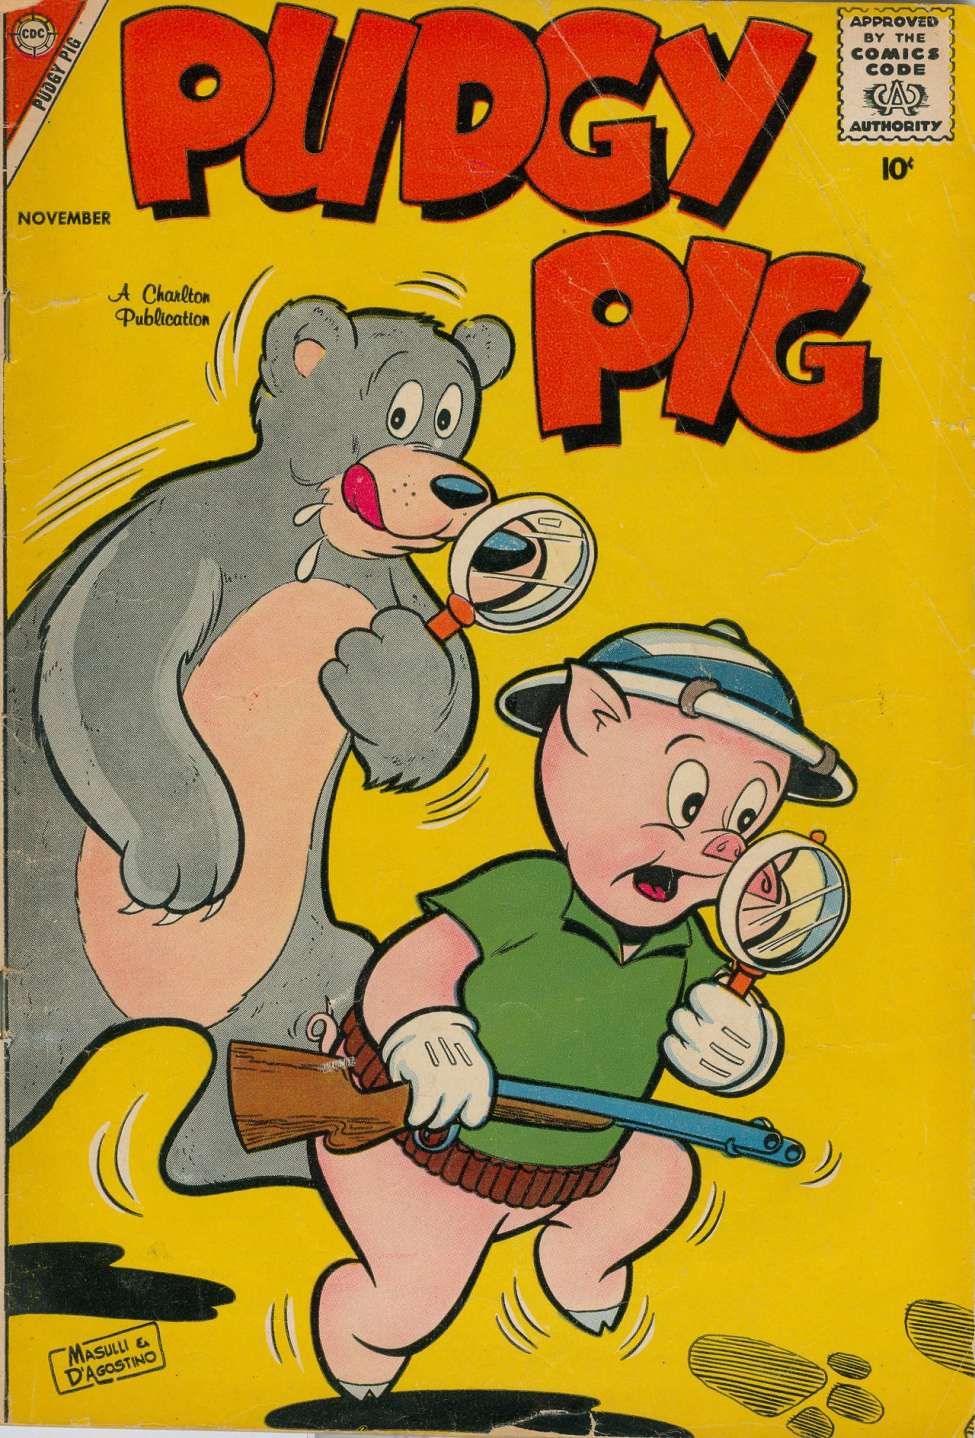 Book Cover For Pudgy Pig 2